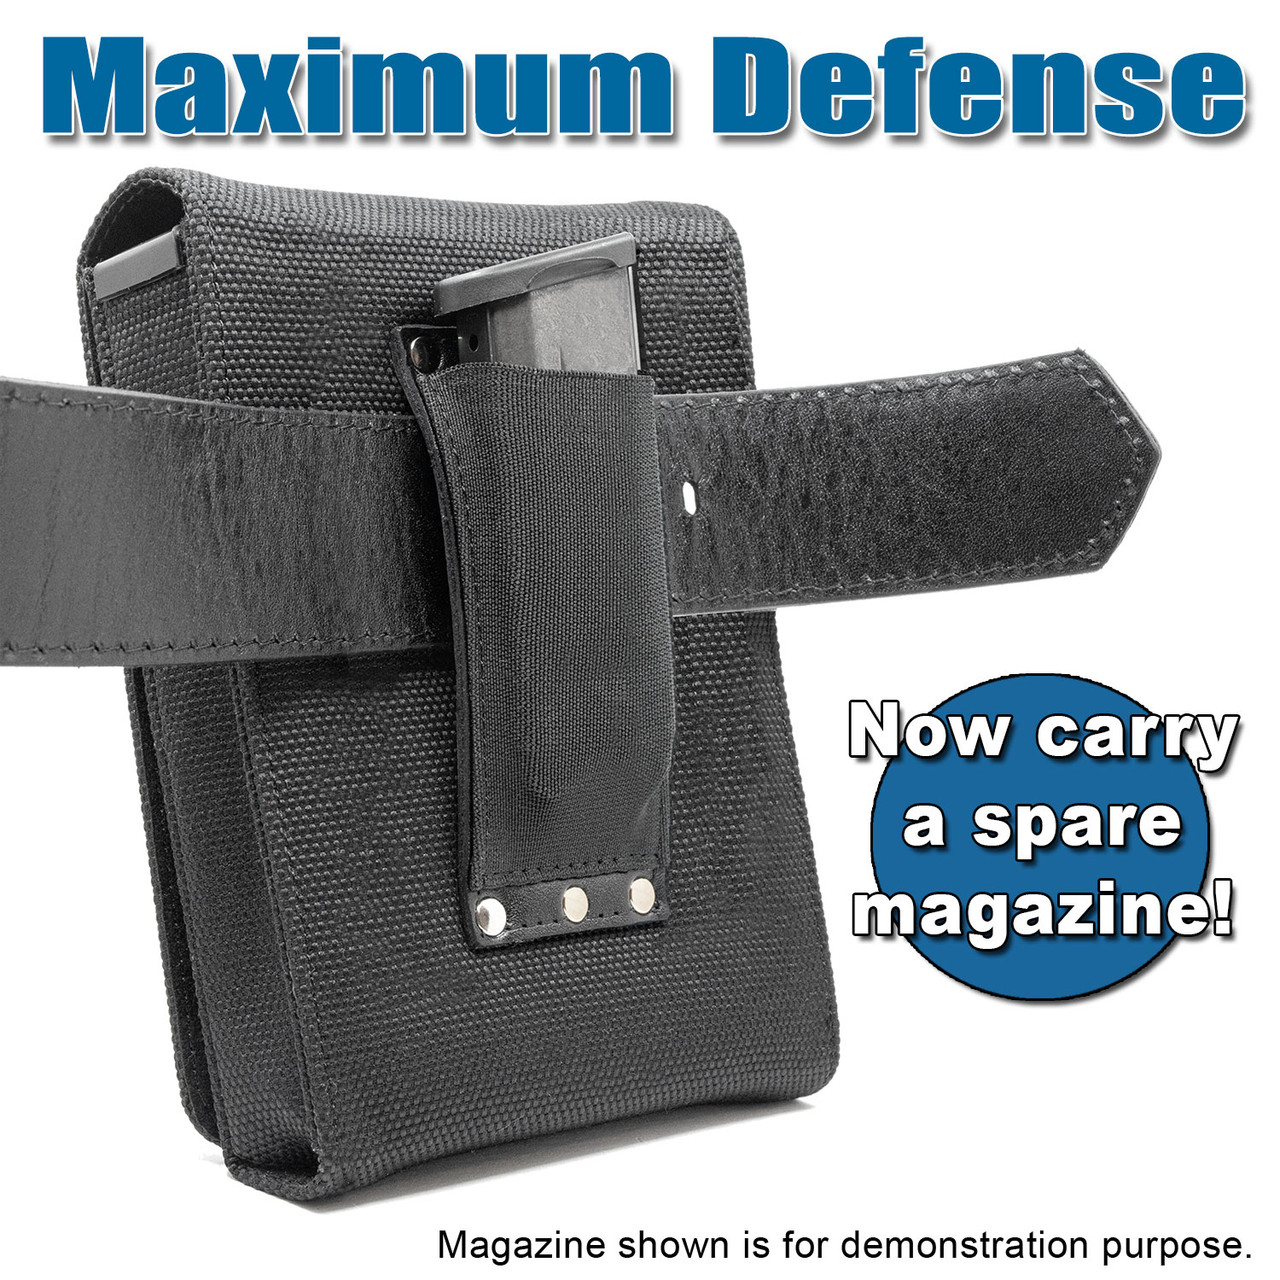 The Springfield XD9 Max Defense Holster